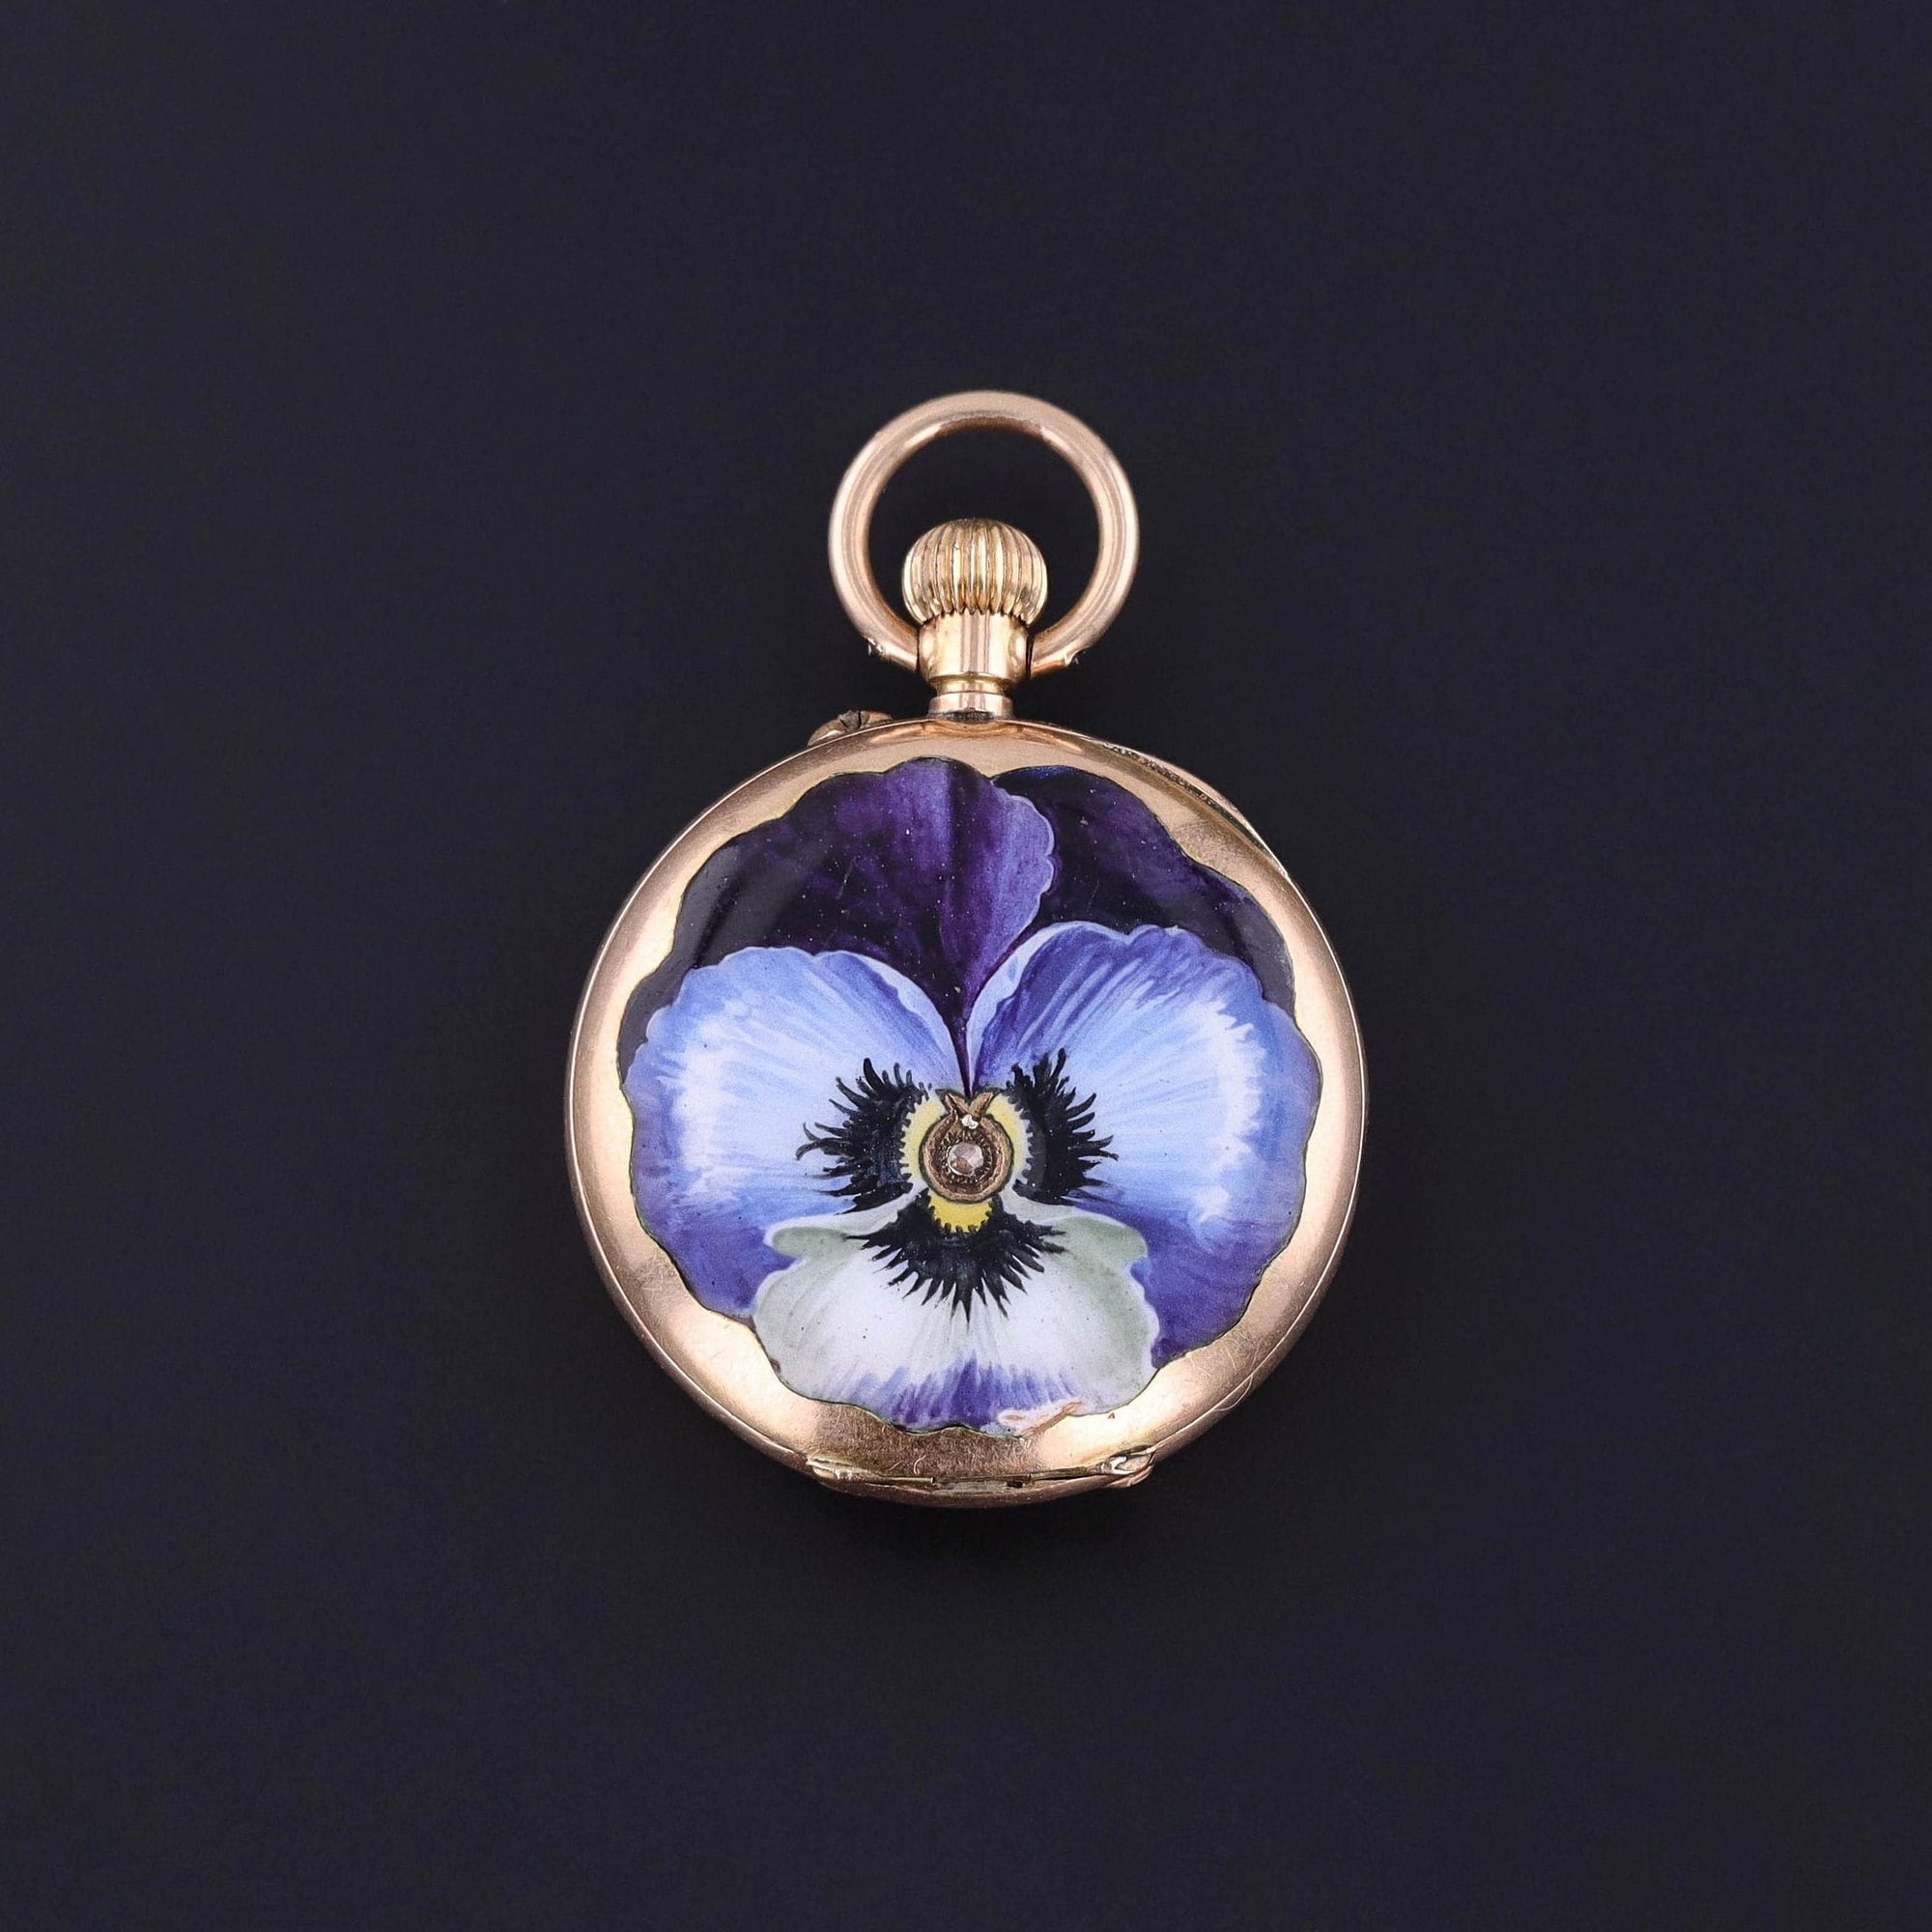 An antique enamel pocket watch adorned with a vibrant purple and white pansy. The 14k gold watch is fully functional and dates to the late 1800s to early 1900s. It is in very good condition and perfect for any watch or jewelry collector.